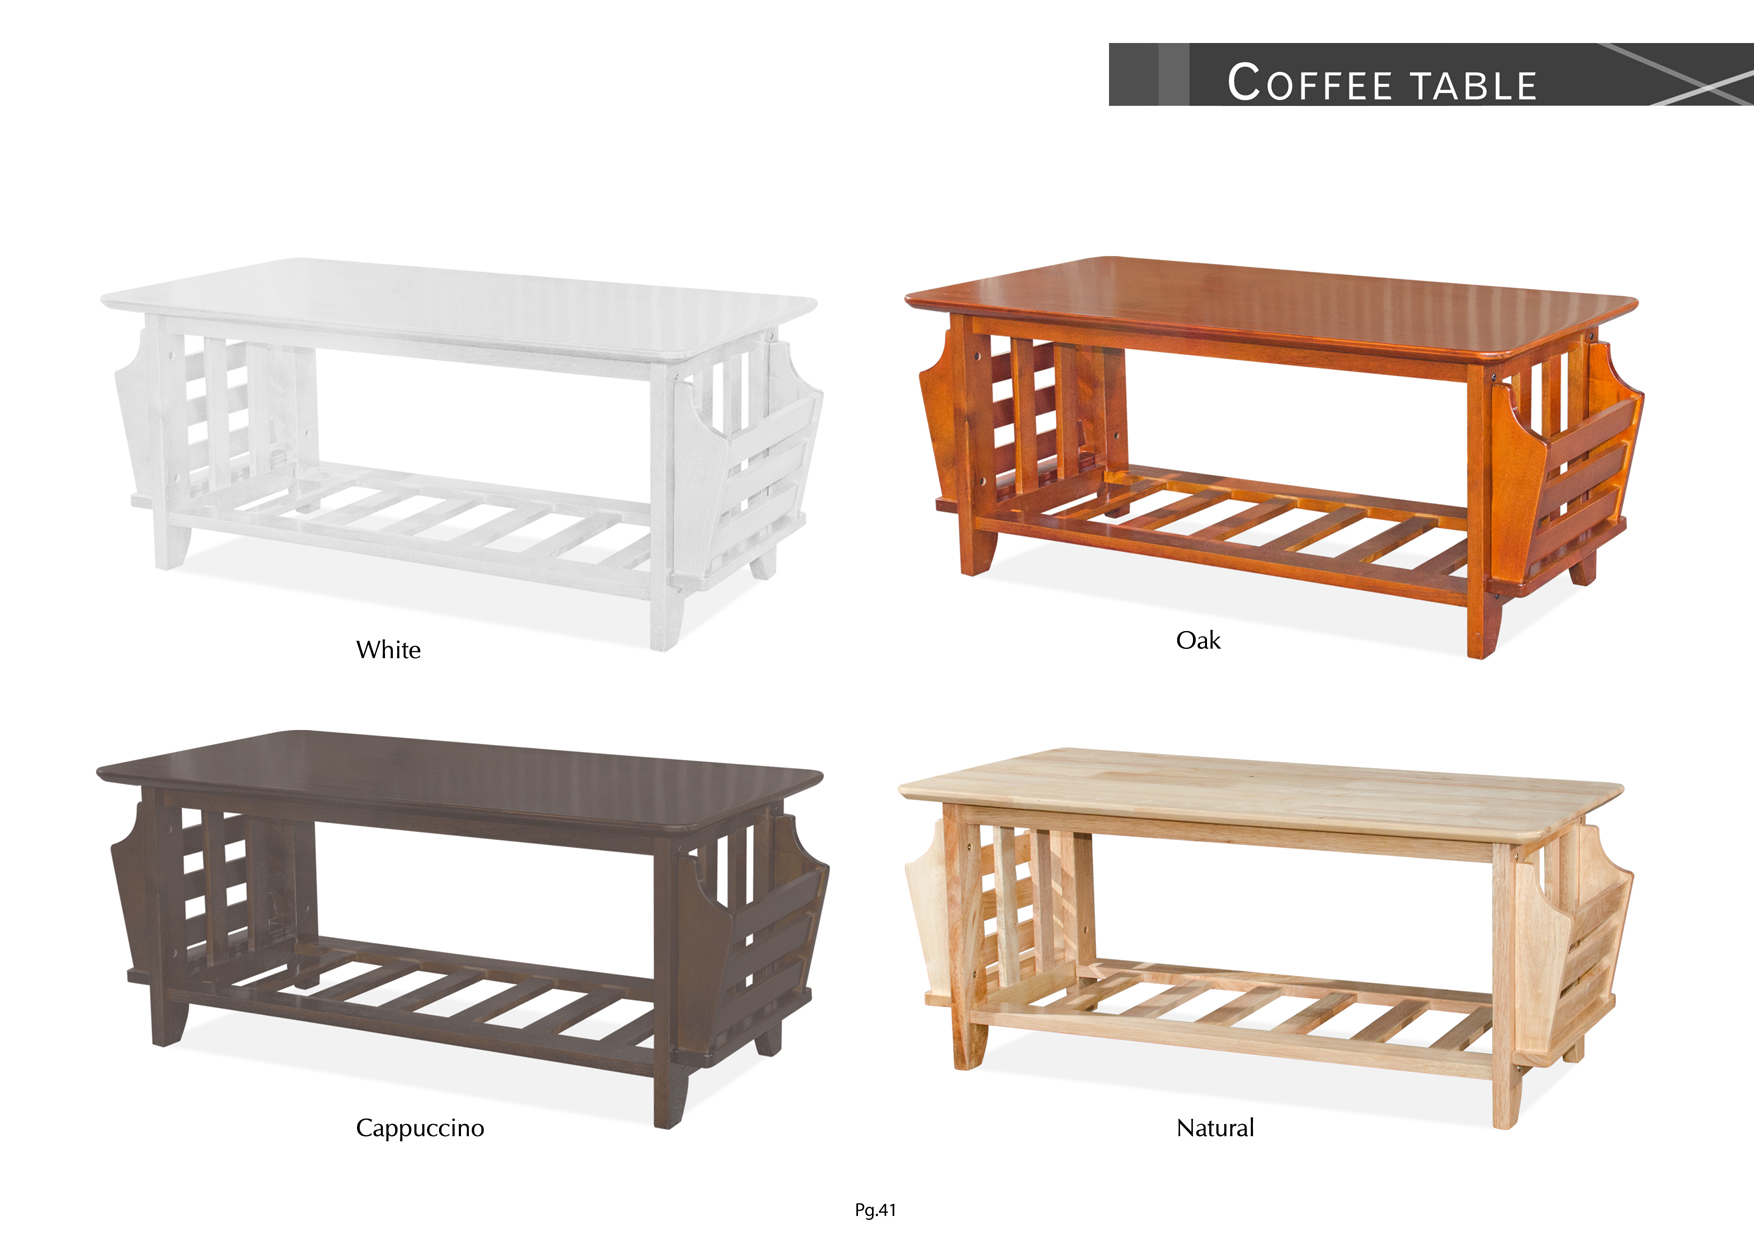 Product: PG41. COSMOS COFFEE TABLE